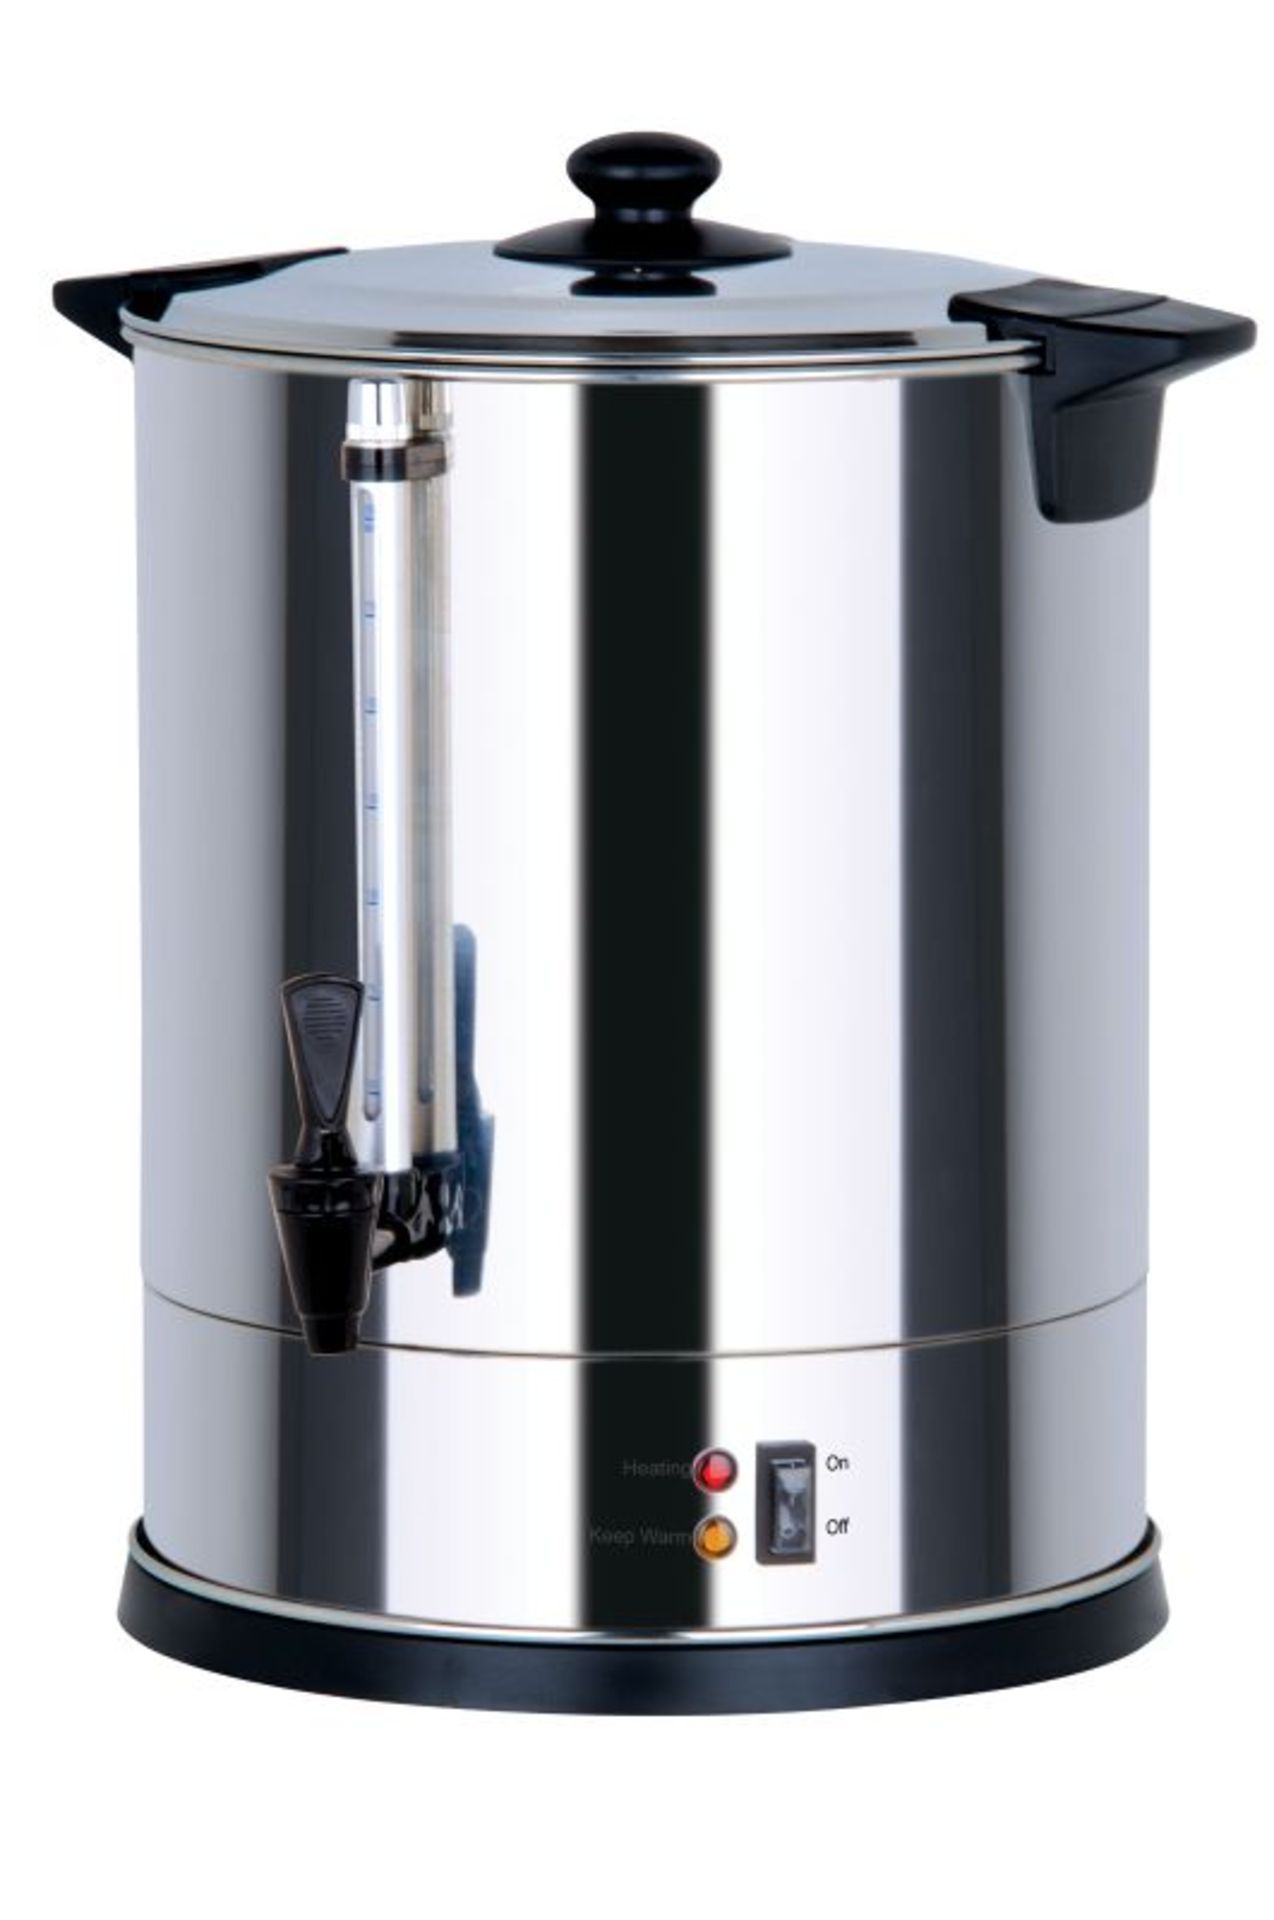 V Grade U Switch On Professional Series 20 Litre Hot Water Urn with Safety Cut Out - Image 2 of 4